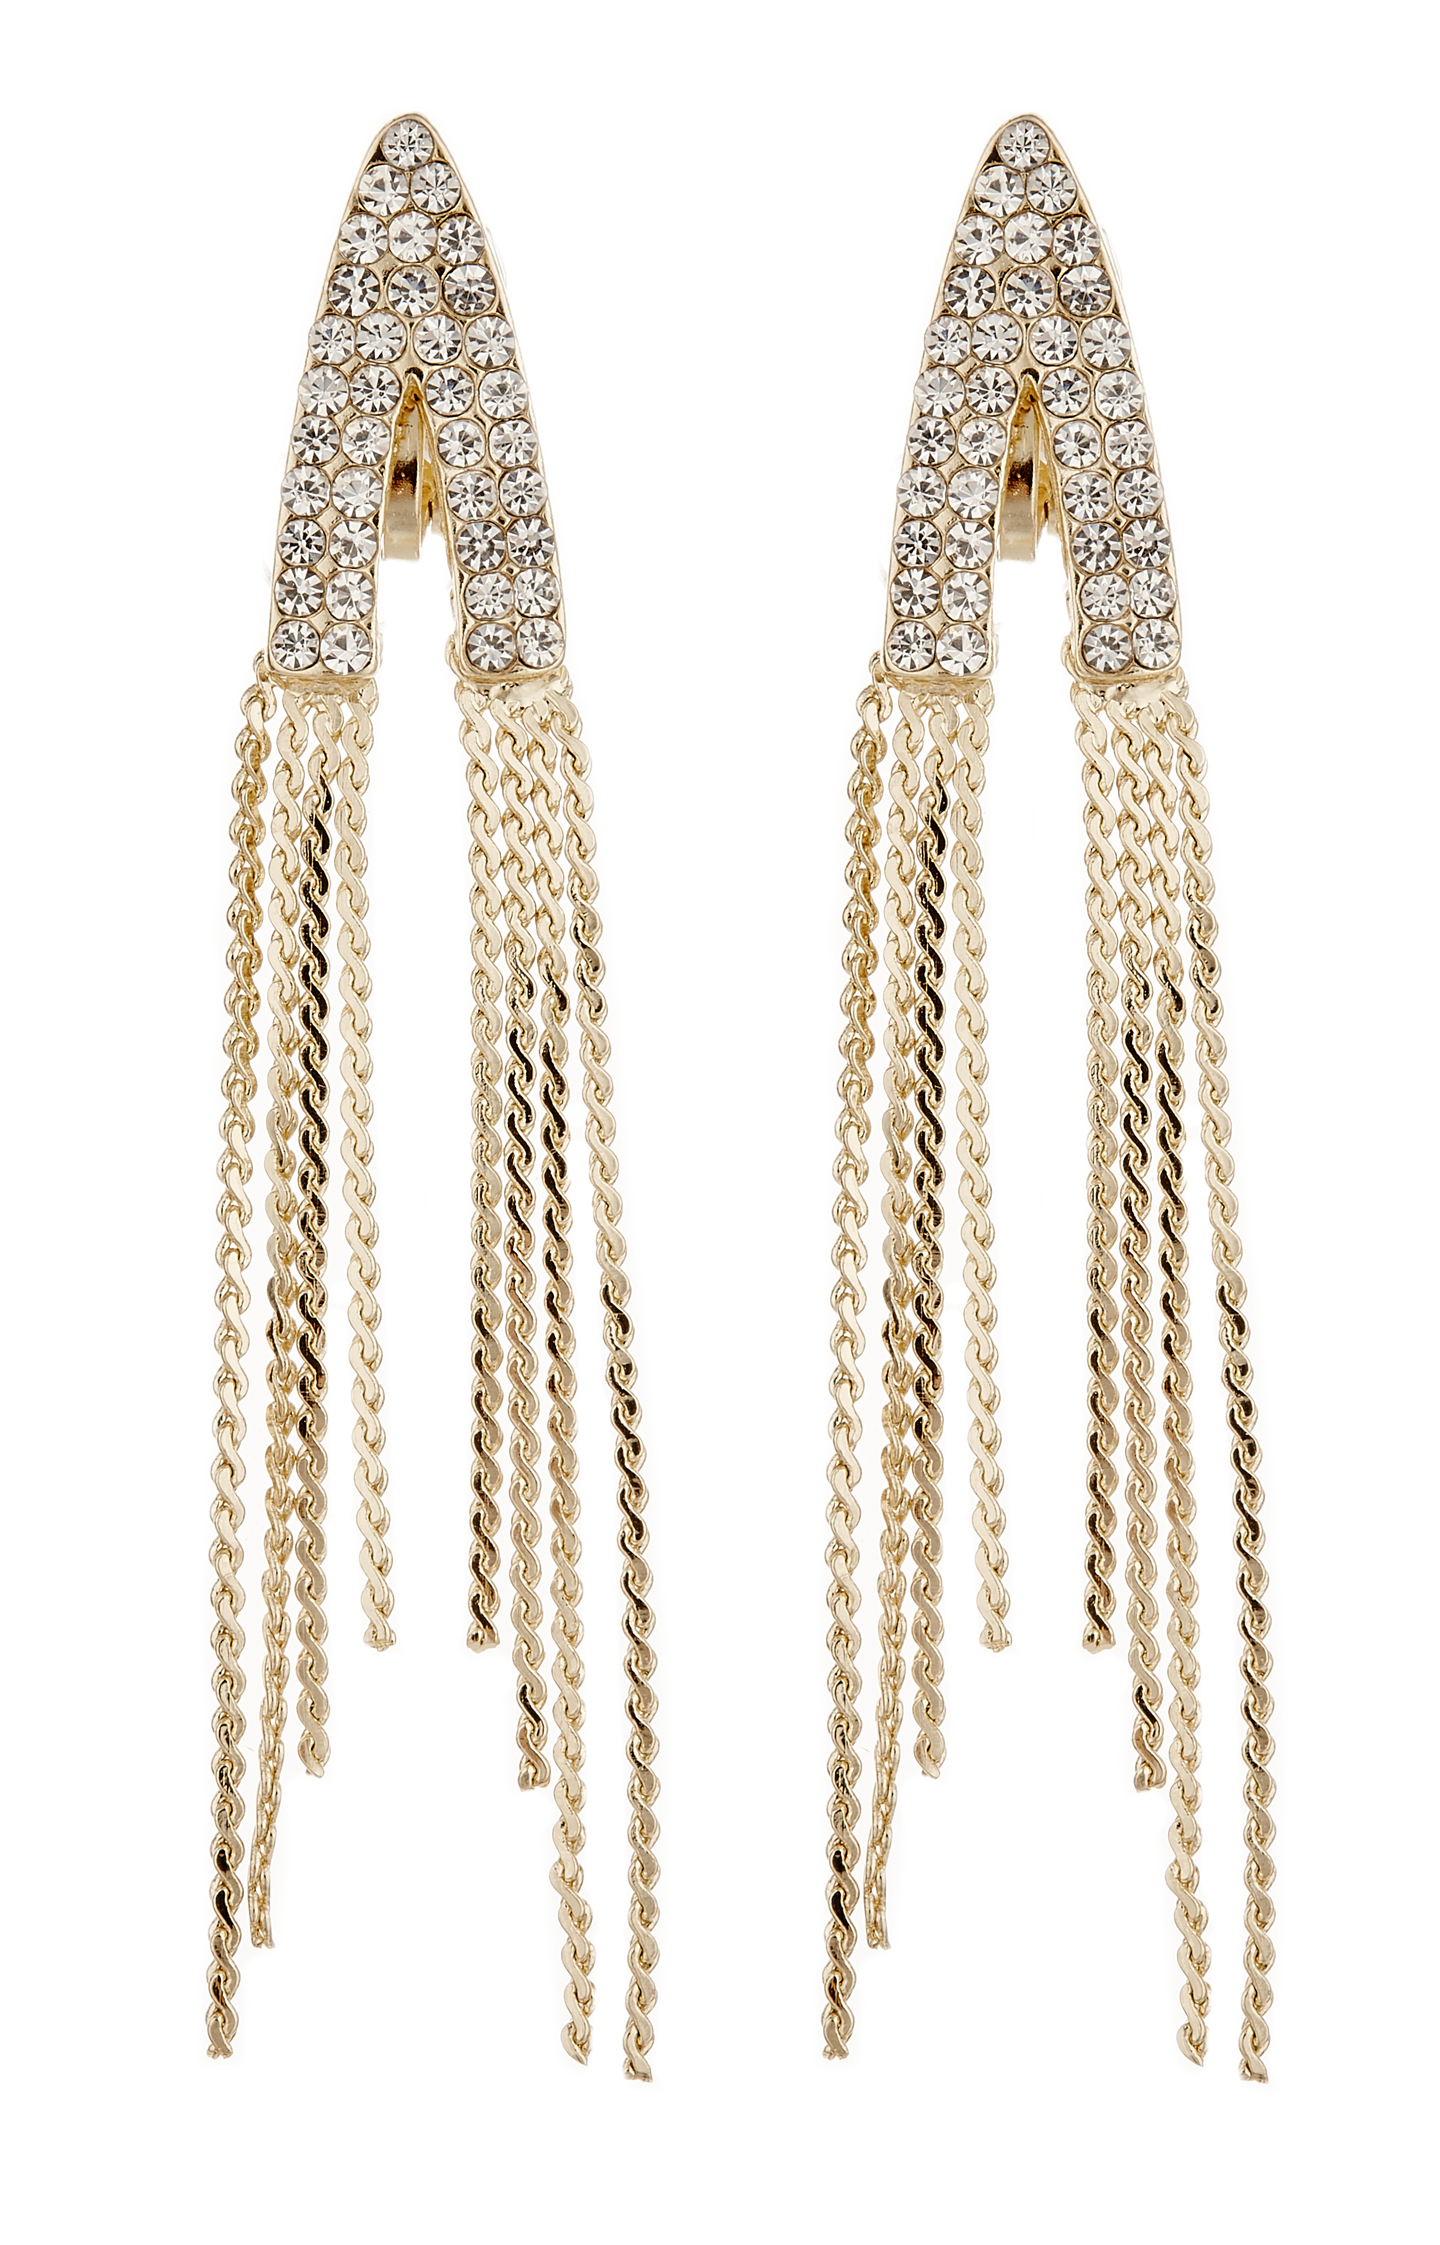 Clip On Earrings - Carla G - gold earring with clear crystals and linked strands